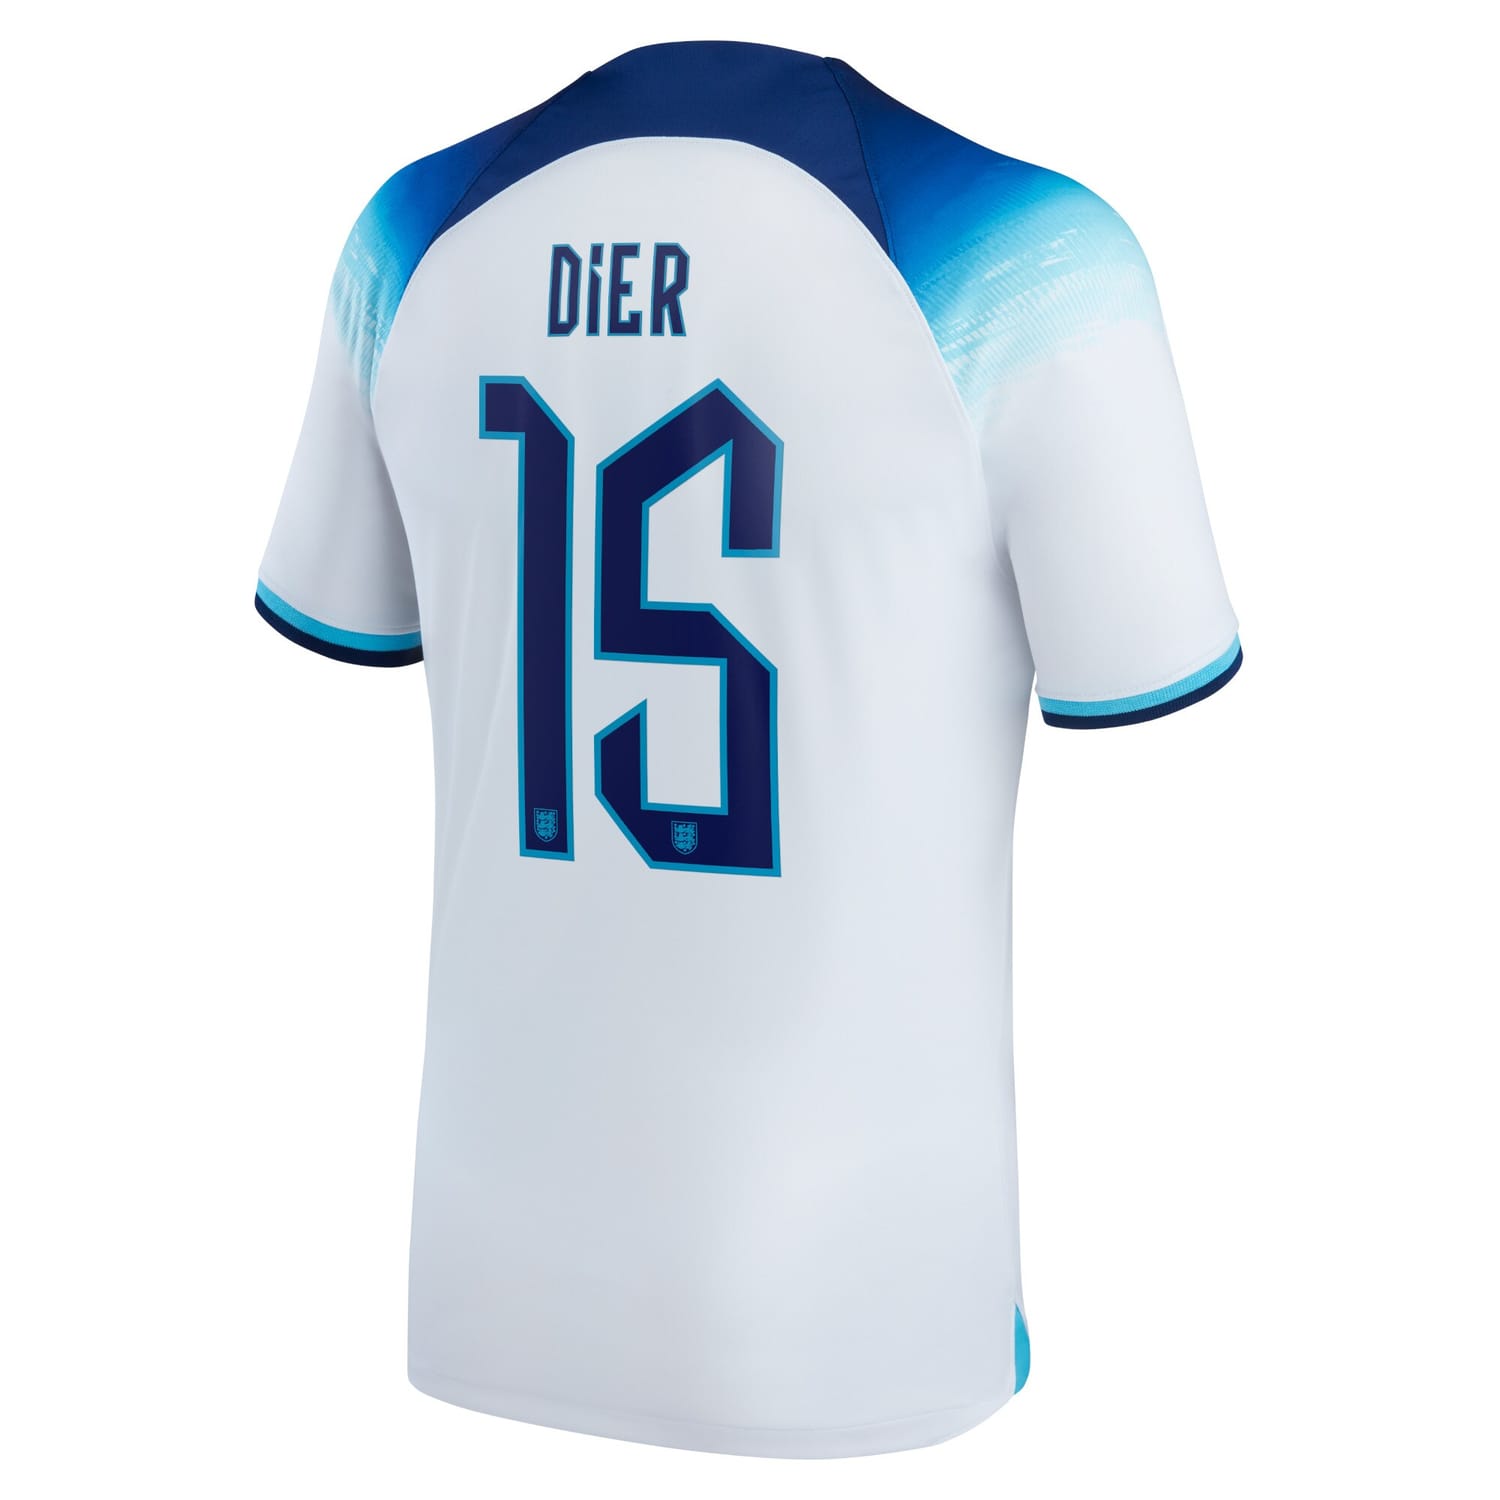 England National Team Home Jersey Shirt 2022 player Eric Dier 15 printing for Men